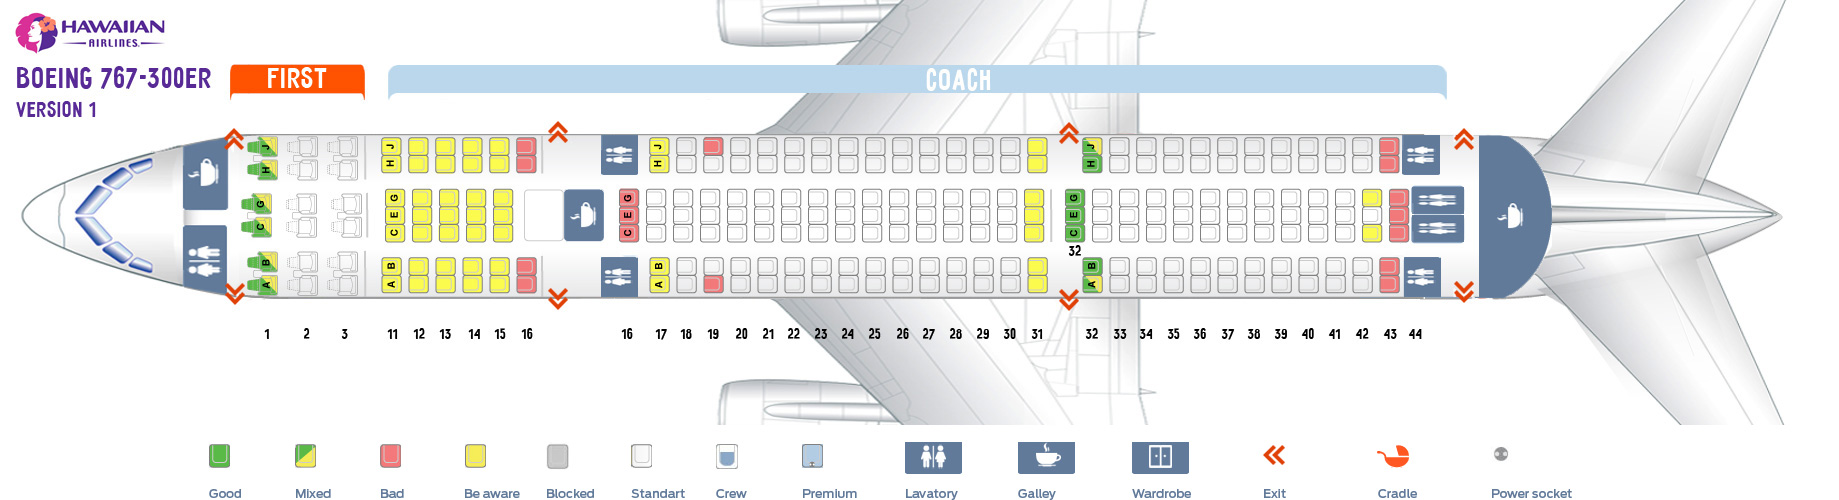 Seat map Boeing 767-300 Hawaiian Airlines. Best seats in the ...